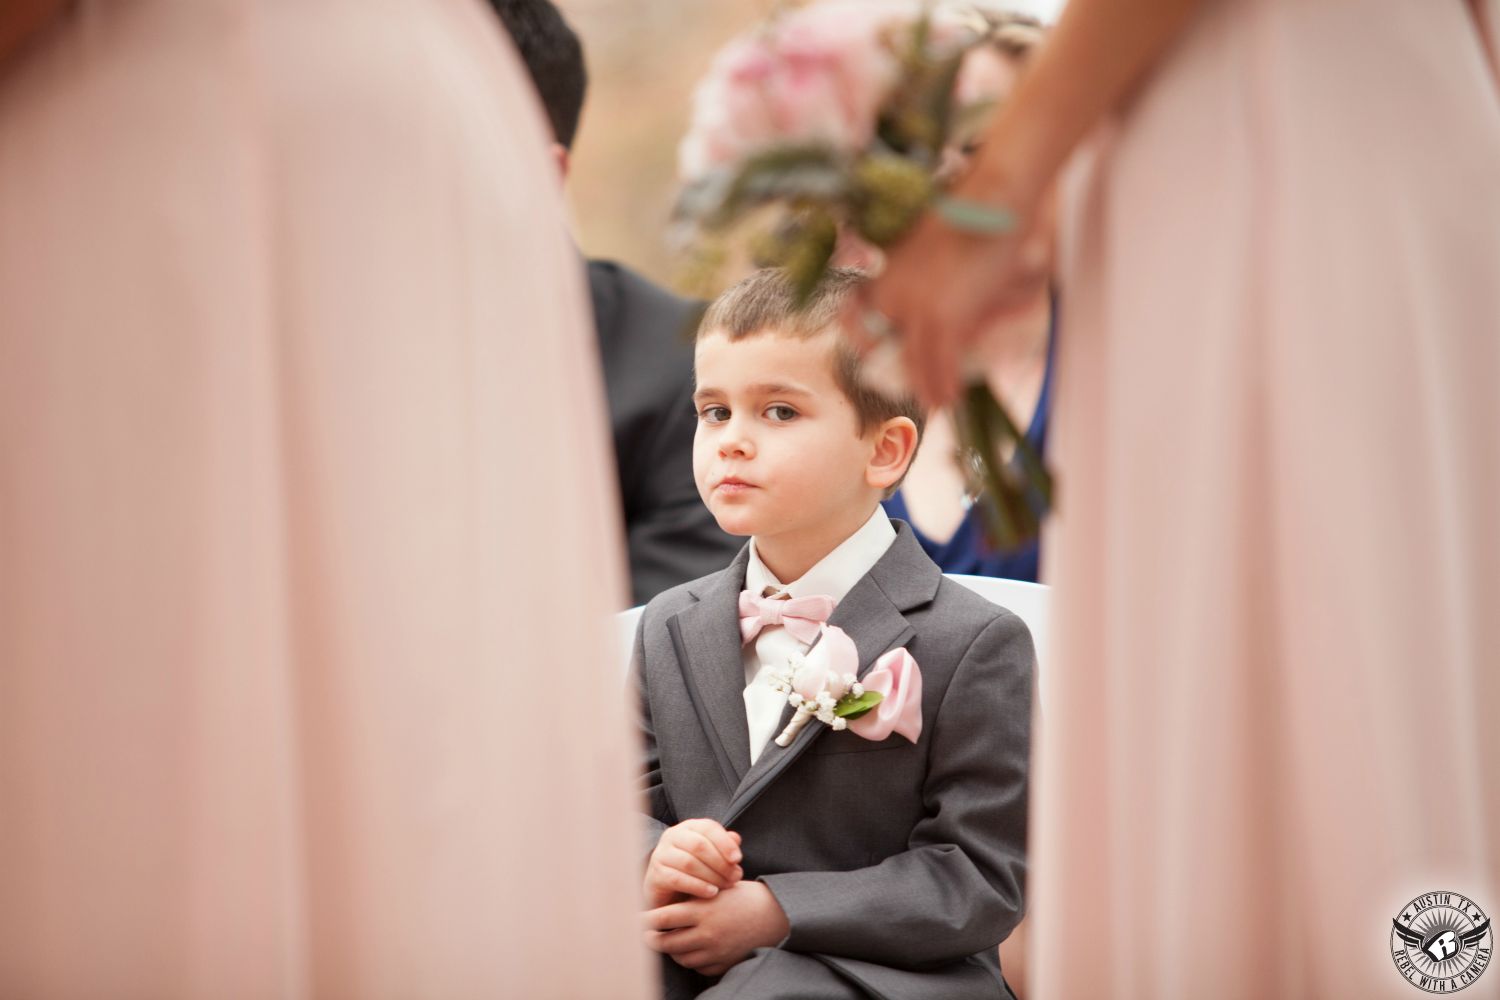 Wedding picture of adorable ringbearer in grey suit with light pink rose boutonniere and pink bowtie looks at the camera through bridesmaids holding beautiful pink bouquets by HEB Blooms during wedding ceremony at the arbor at Nature's Point Austin wedding venue.